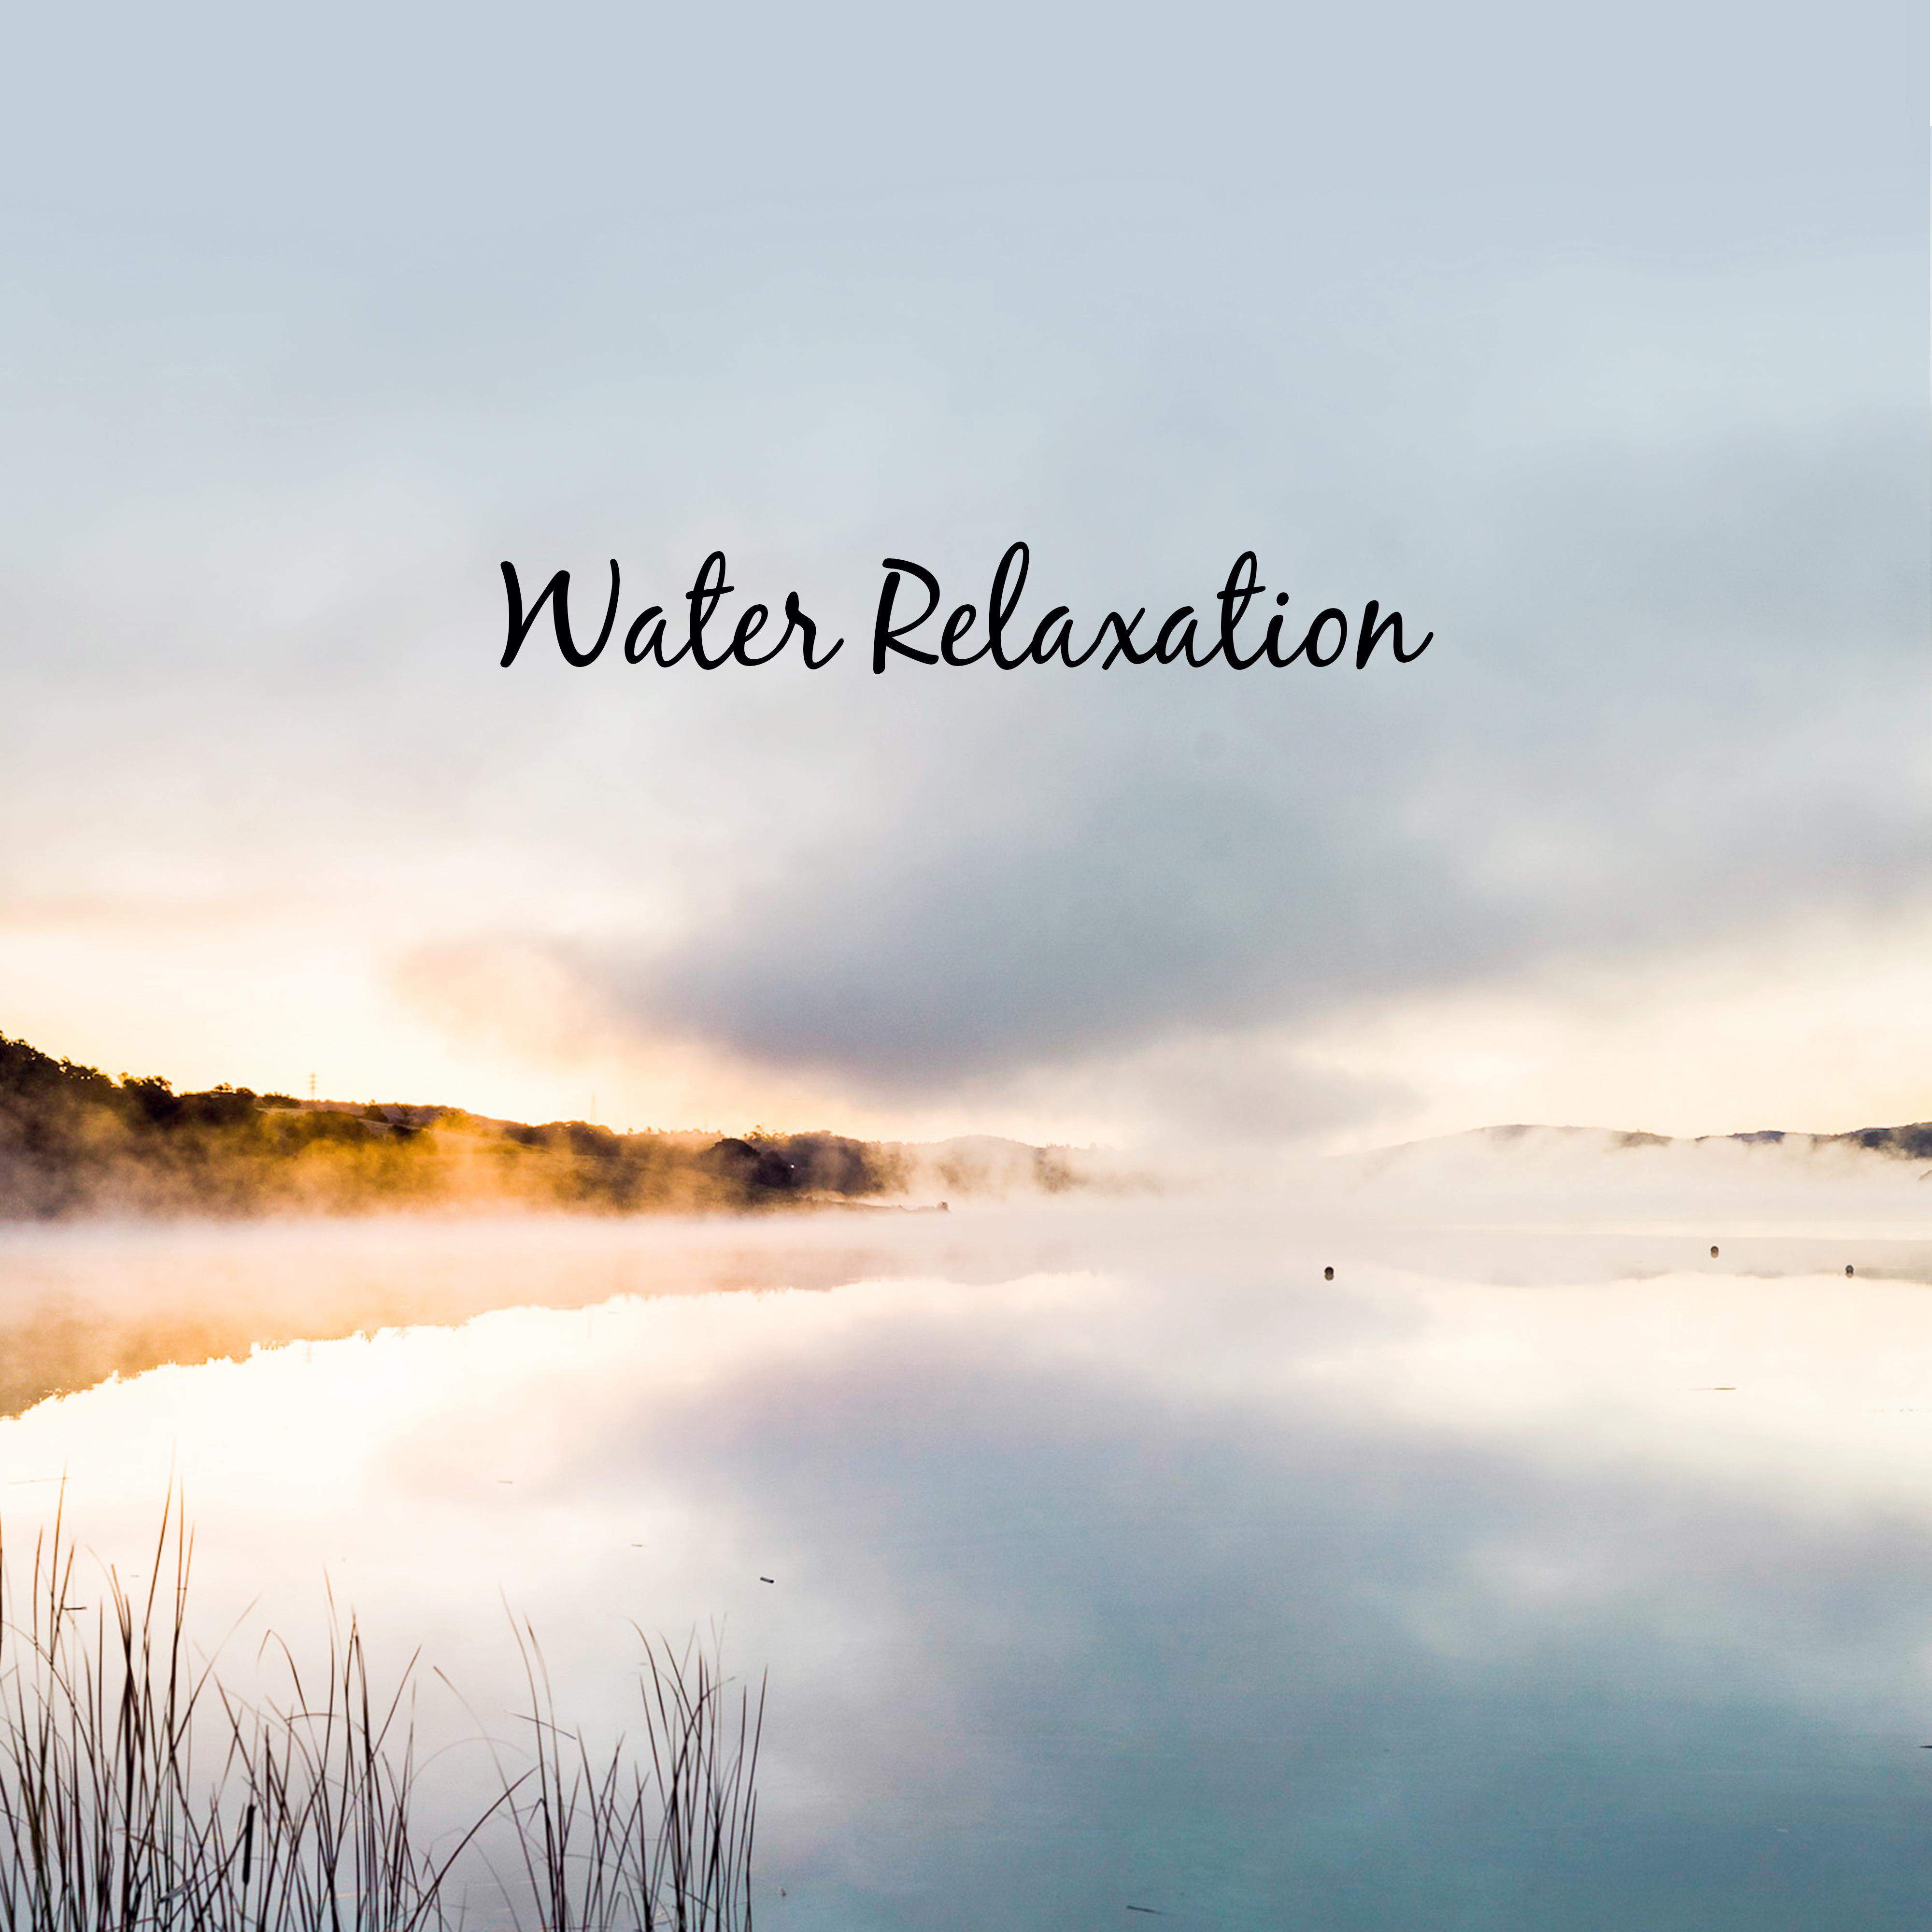 Water Relaxation – New Relaxing Music 2017, Ocean Waves, Helpful for Eliminate Stress, Calm Waves